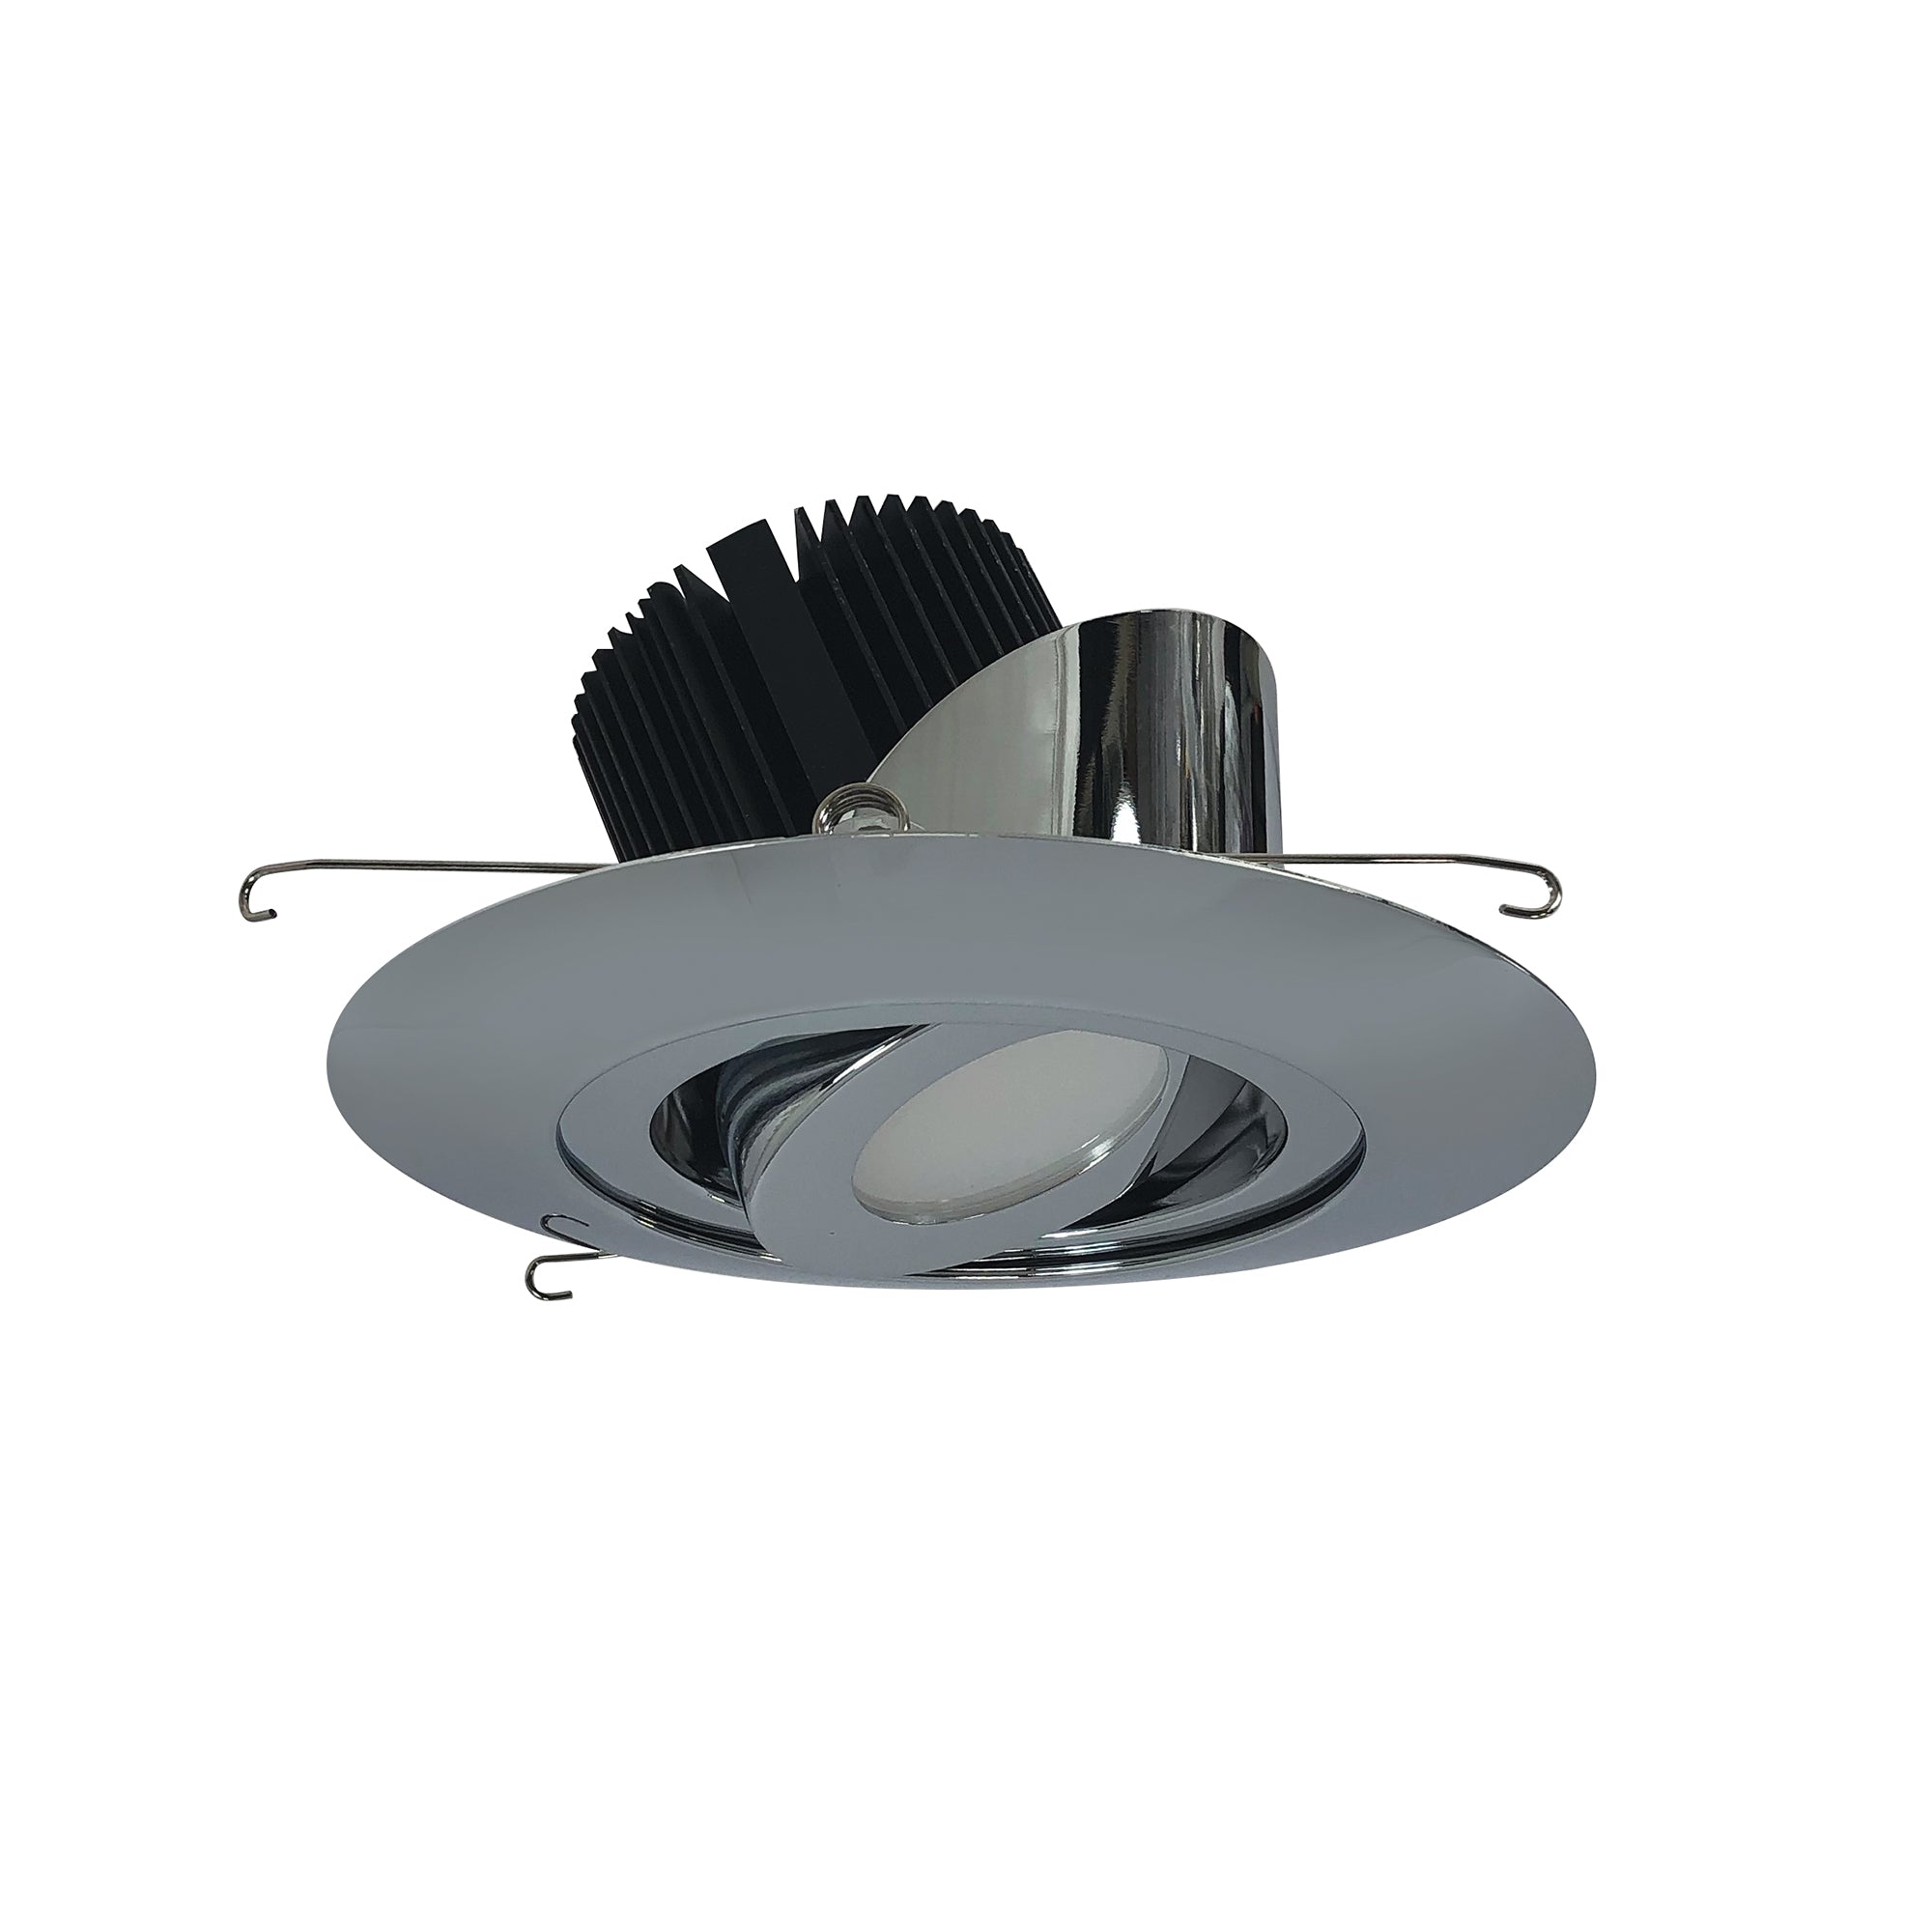 Nora Lighting NRM2-614L2535FC - Recessed - 6 Inch Marquise II Round Surface Adjustable Trim, Flood, 2500lm, 3500K, Chrome (Not Compatible with NHRM2-625 Housings)